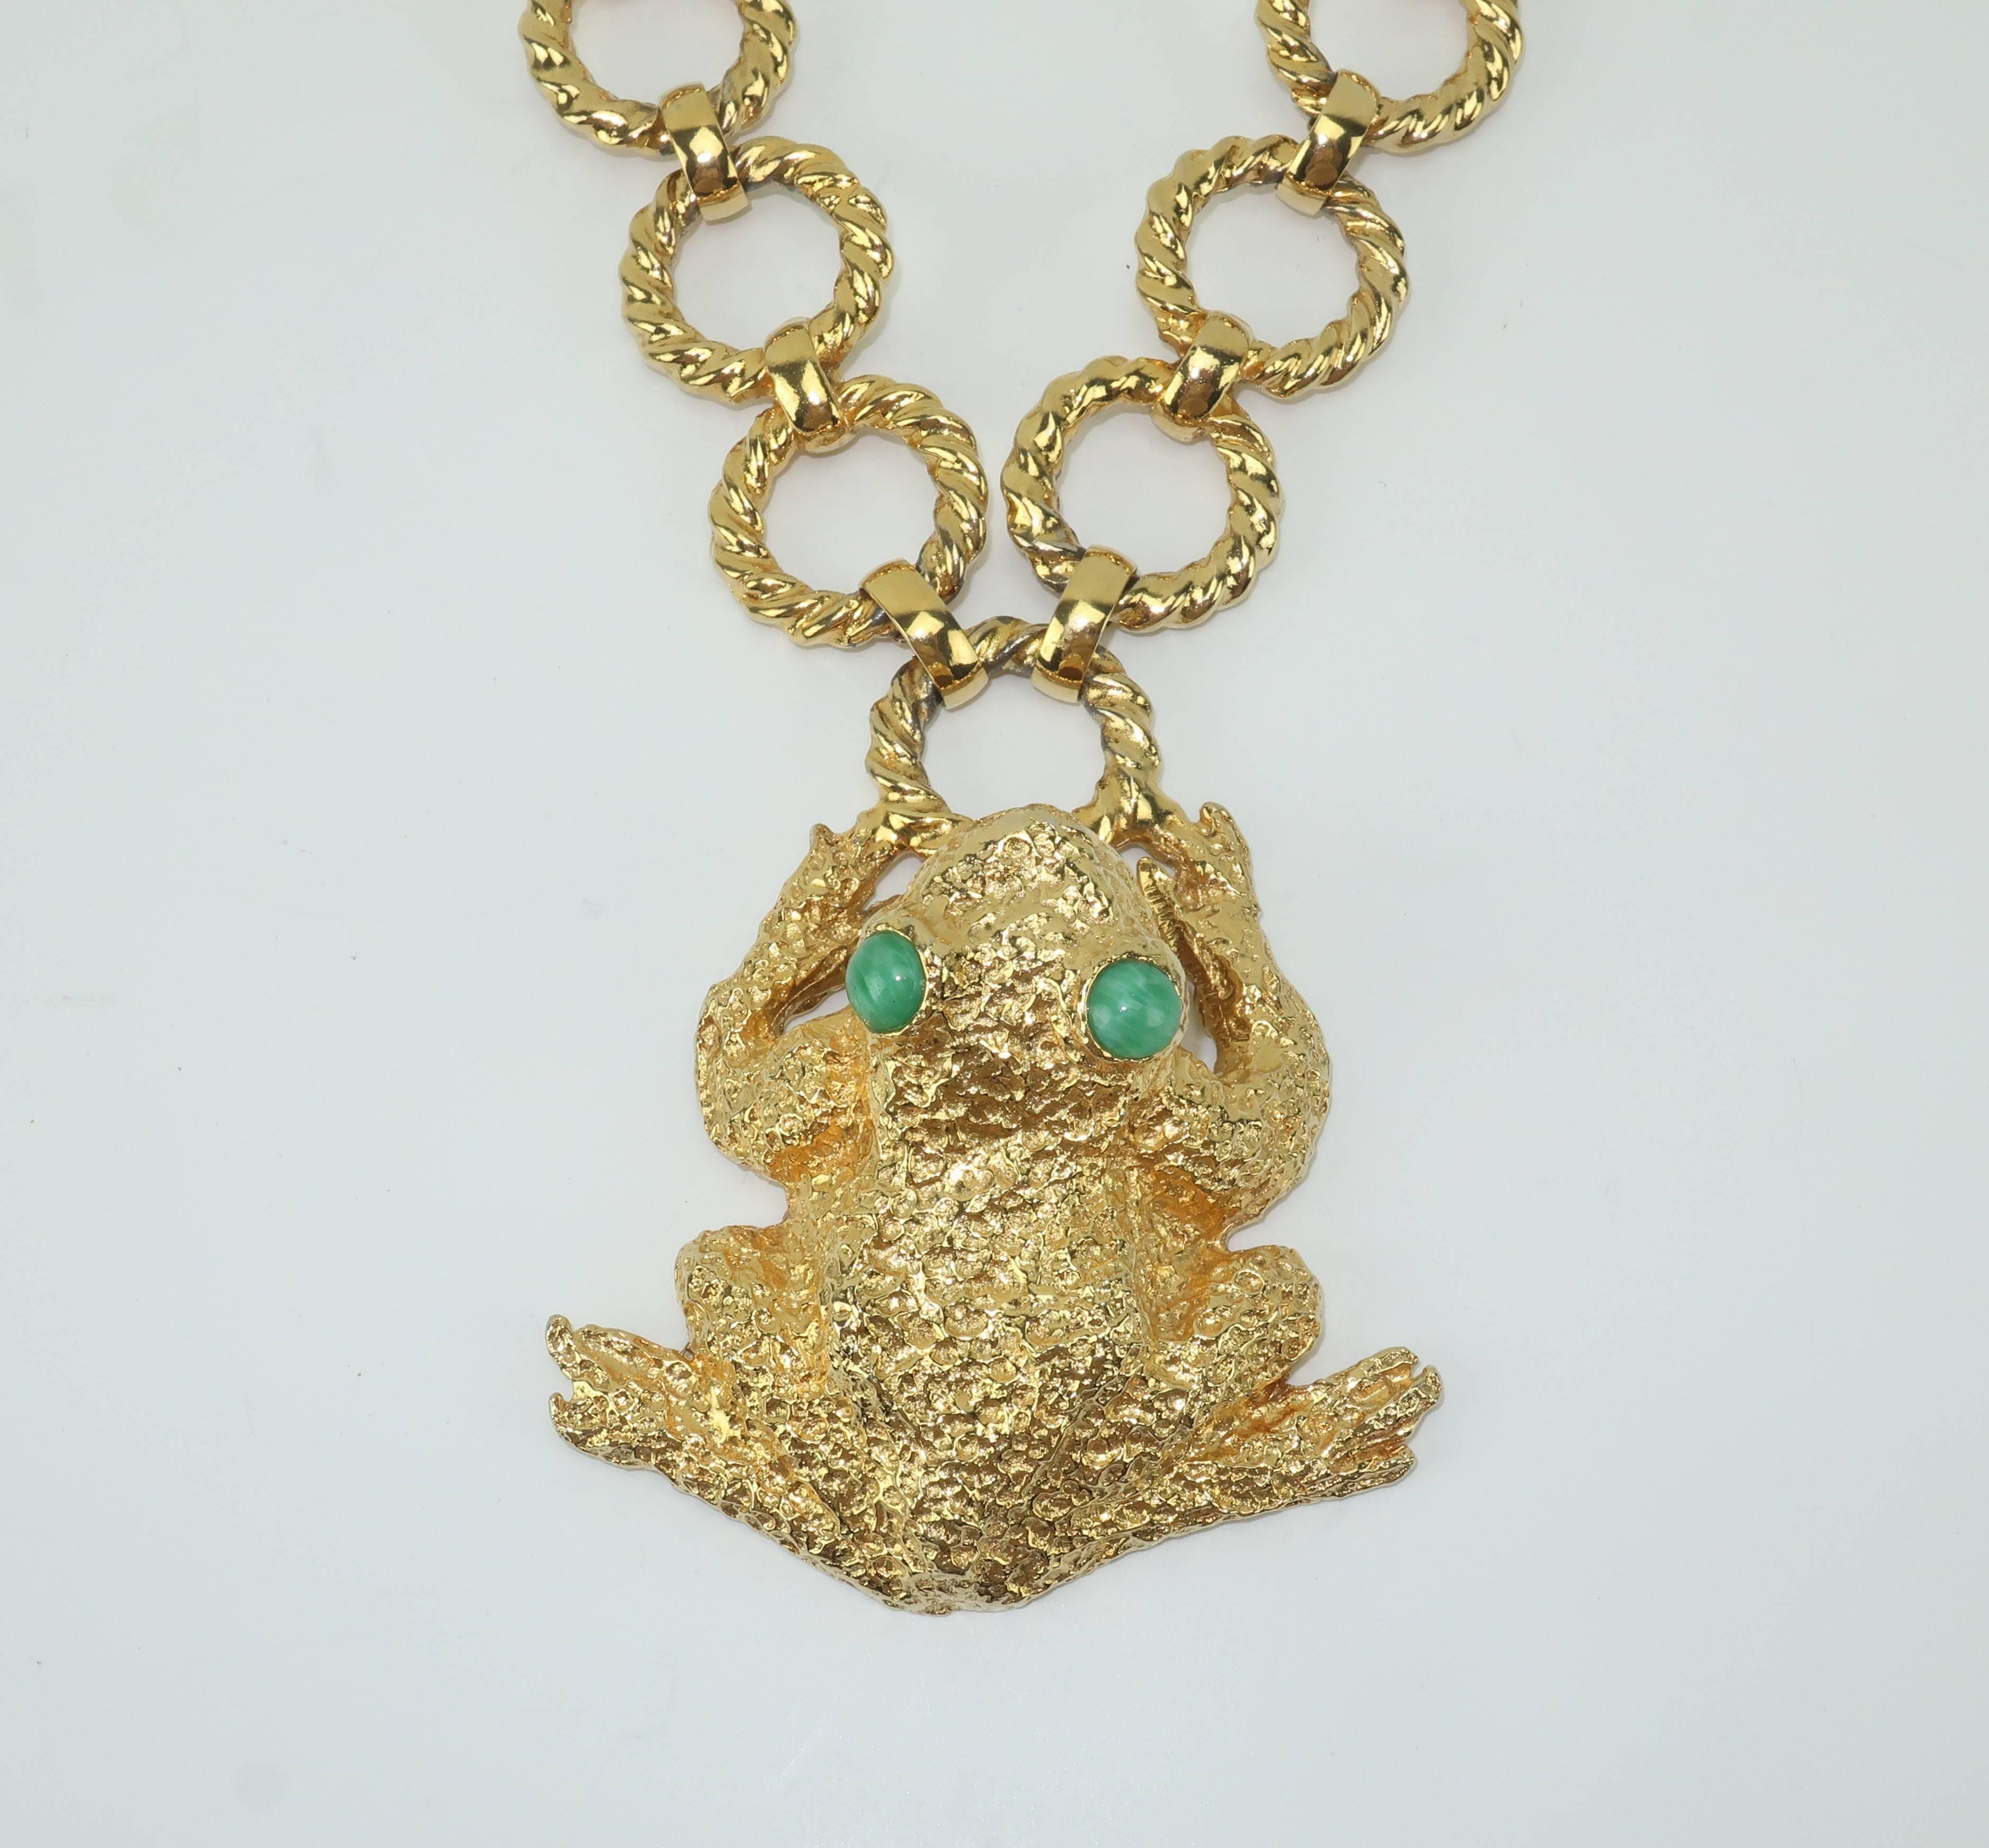 1971 Mimi di N Gold Tone Frog Statement Necklace 2